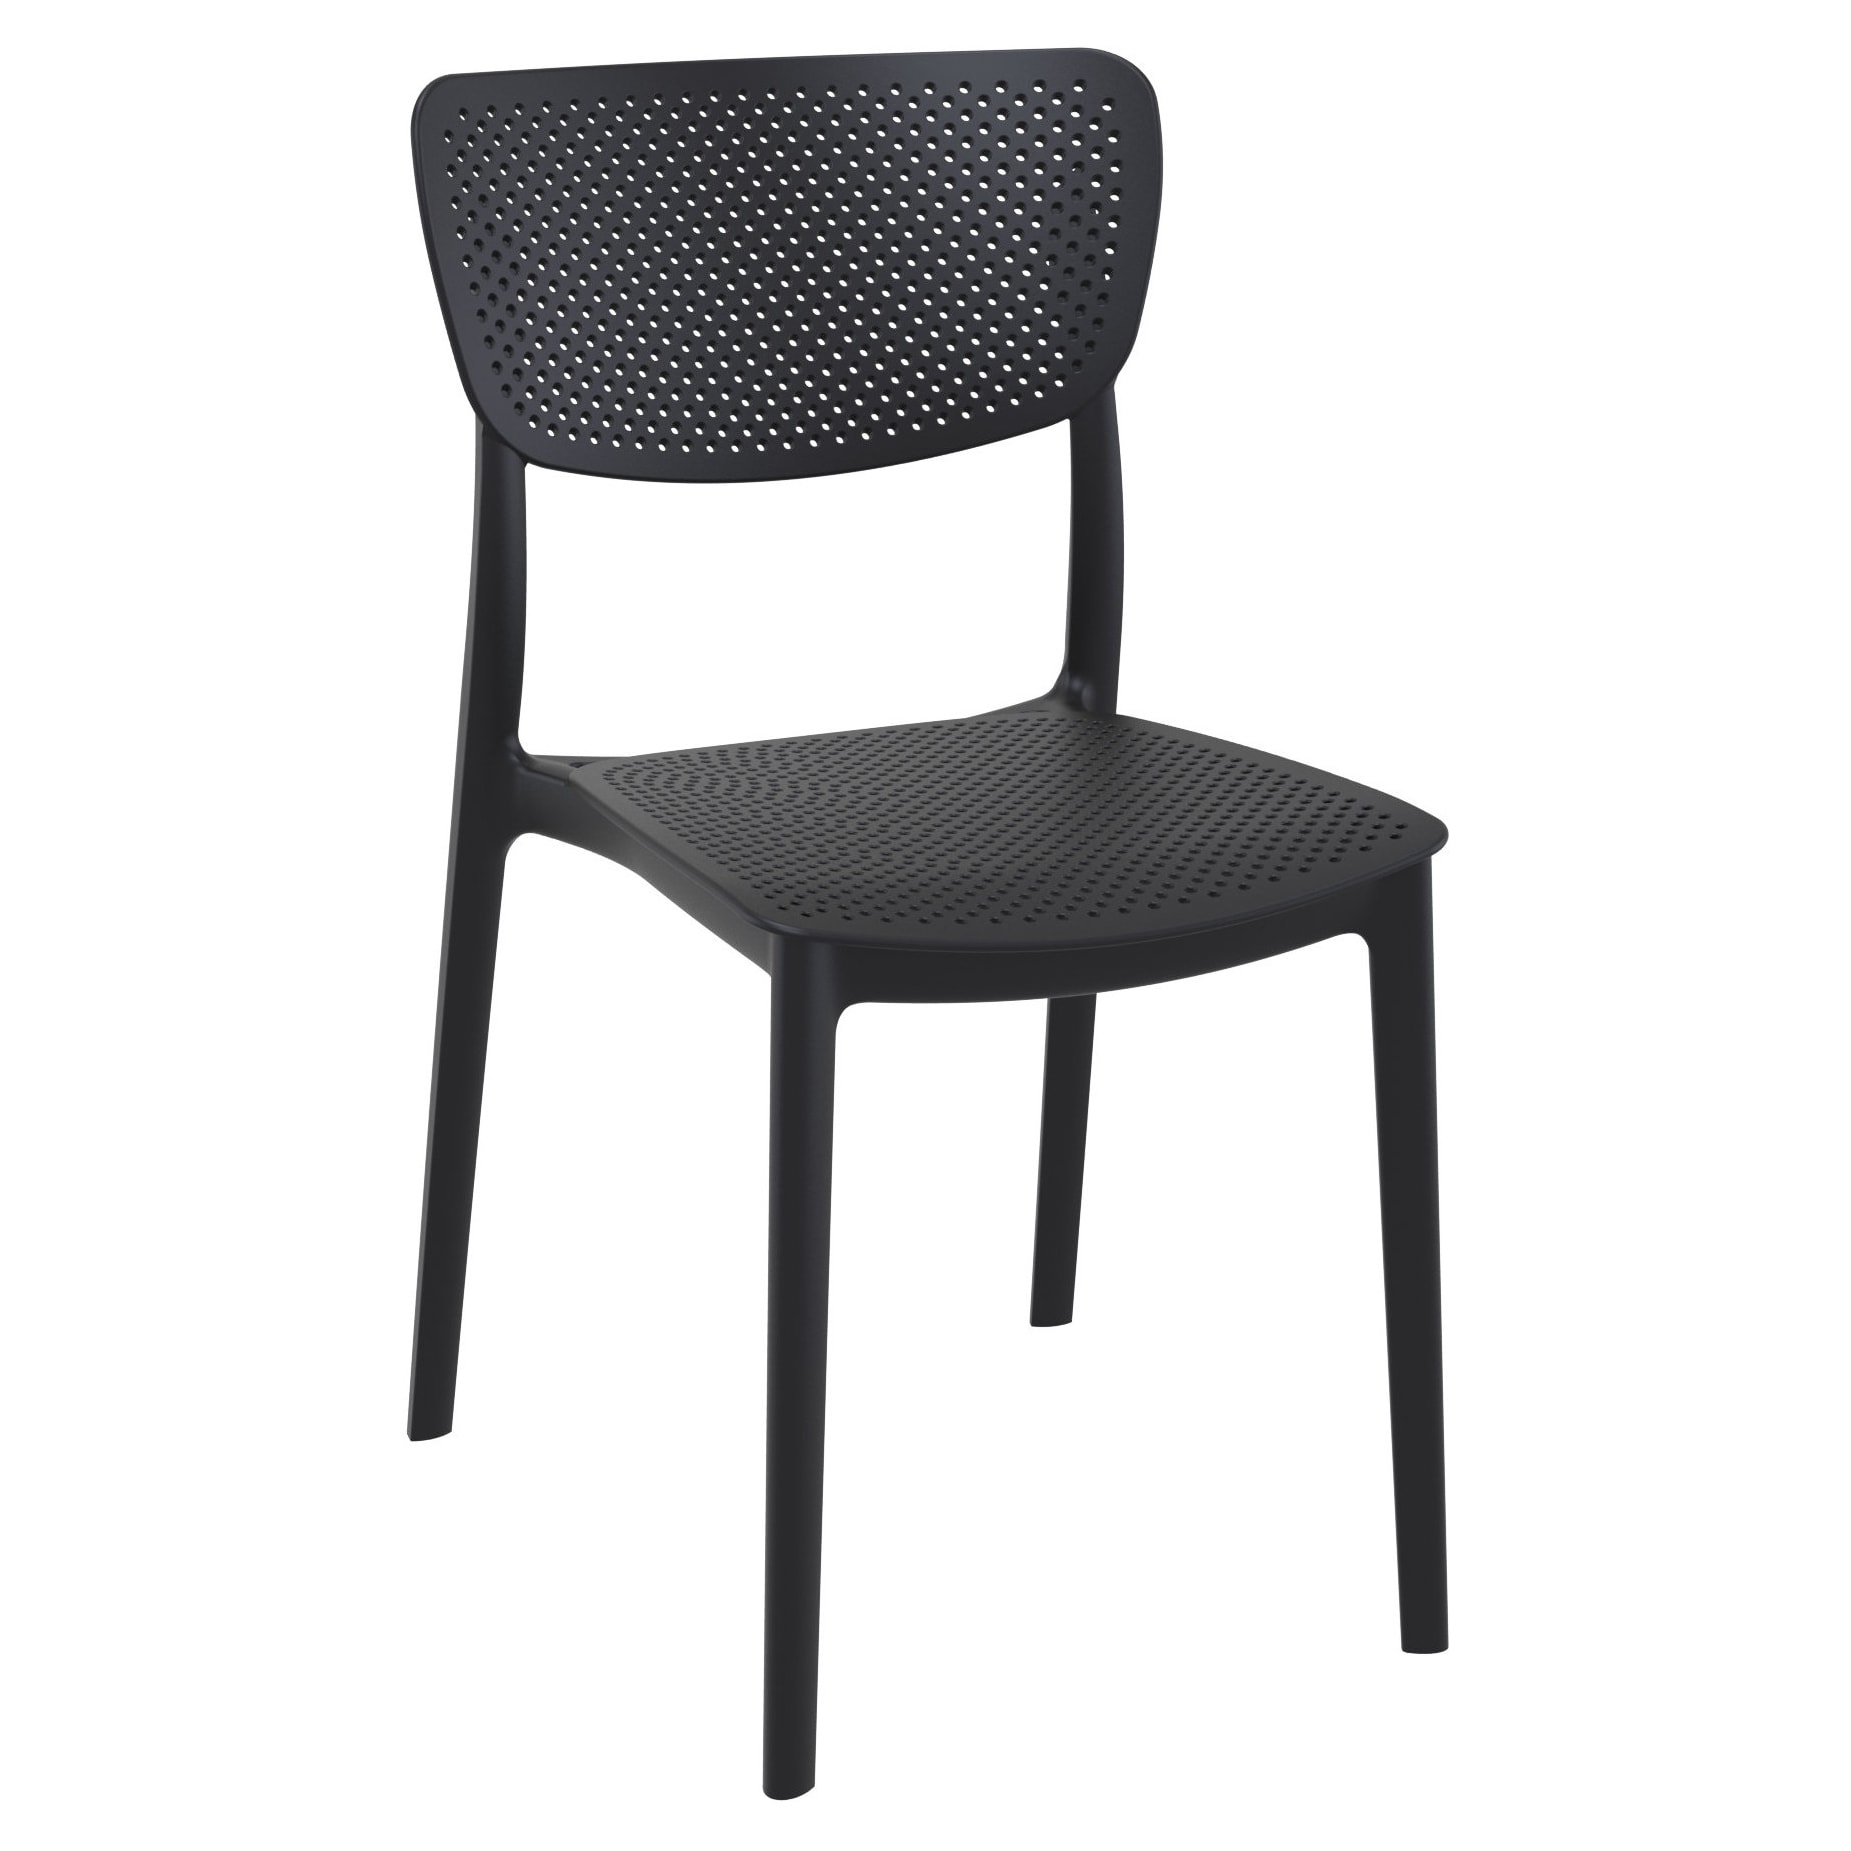 Mesh Resin Patio Chair with Mesh Resin Patio Chair